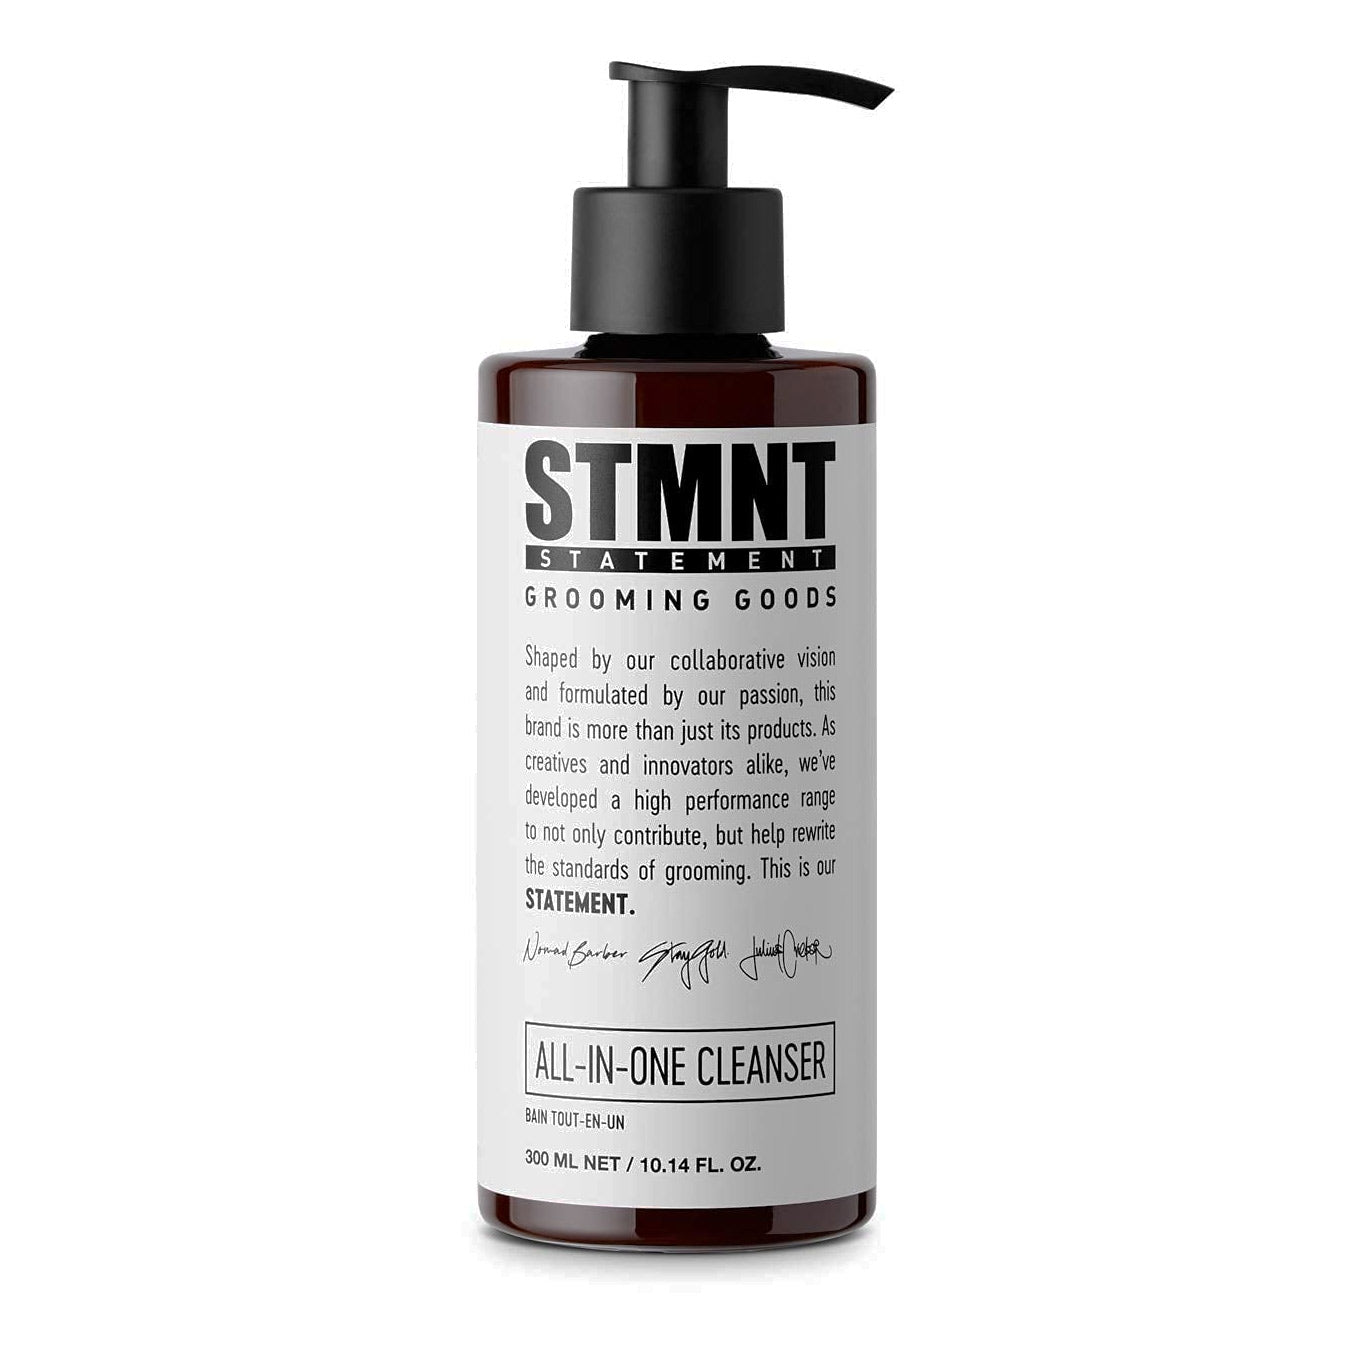 STMNT Grooming Goods All-In-One Daily Cleanser